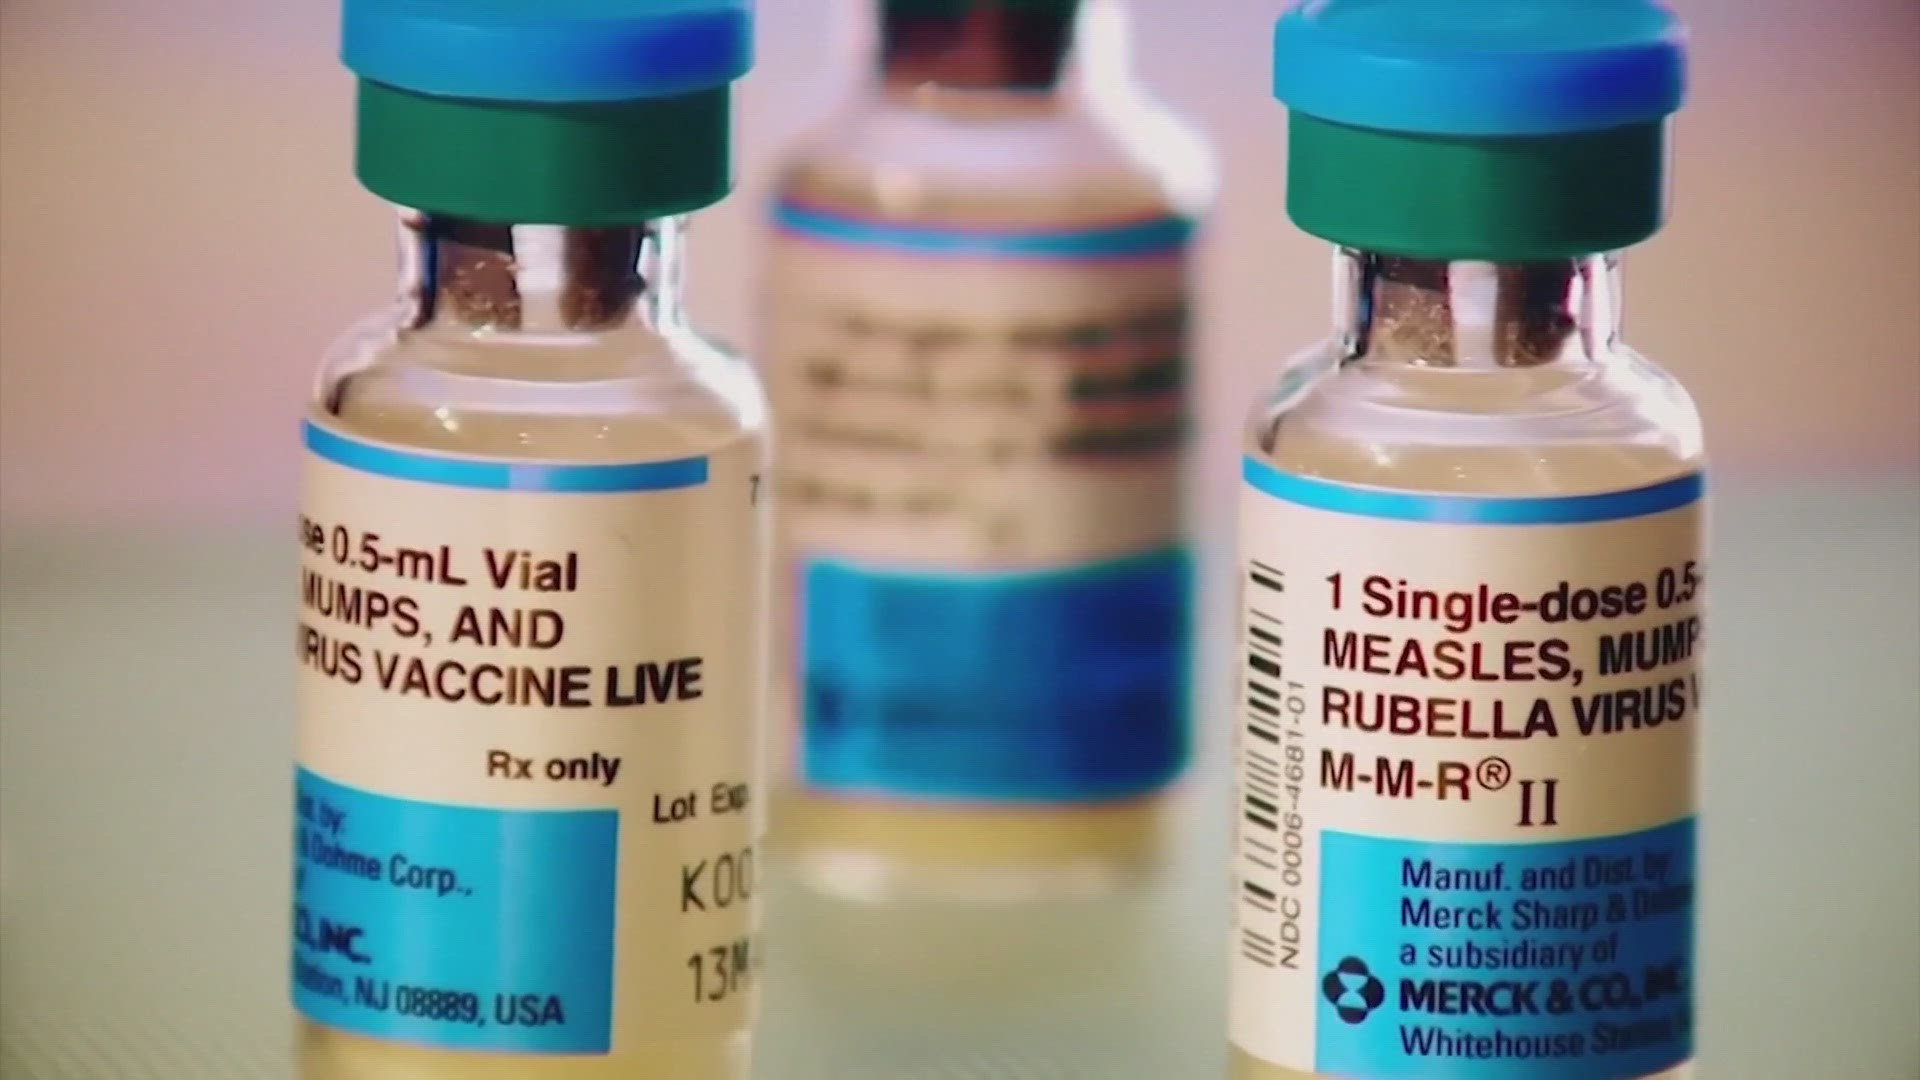 Chicago public schools has urged parents and guardians to make sure students' MMR vaccine records were up to date.